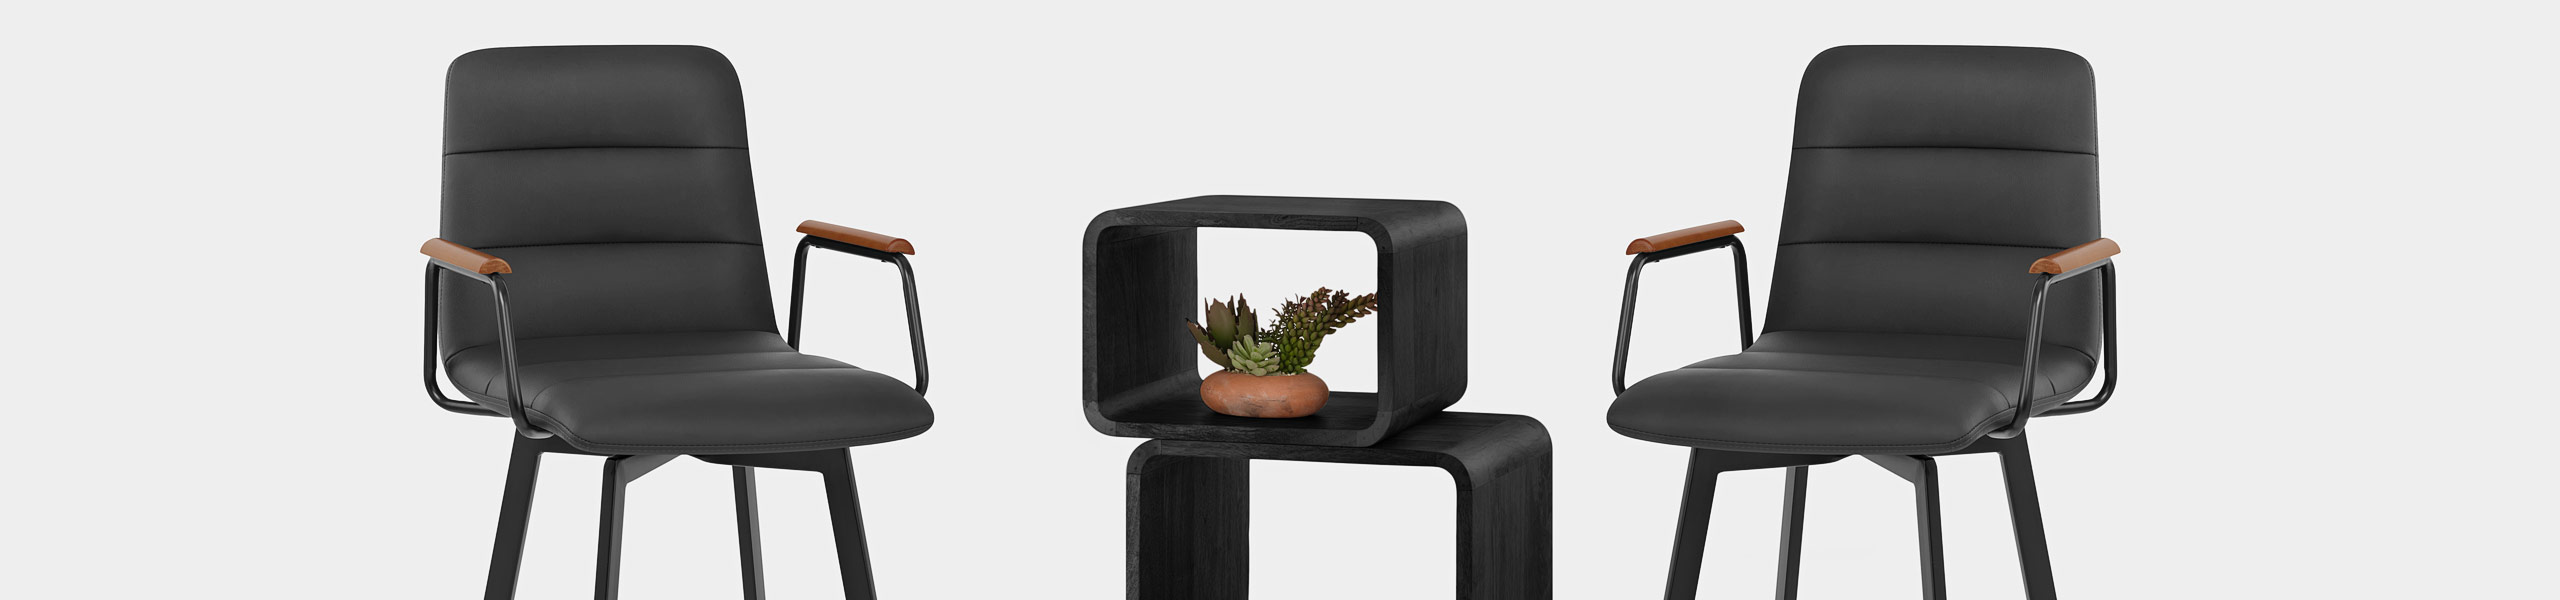 Marco Stool Walnut Arms & Black Leather Video Banner